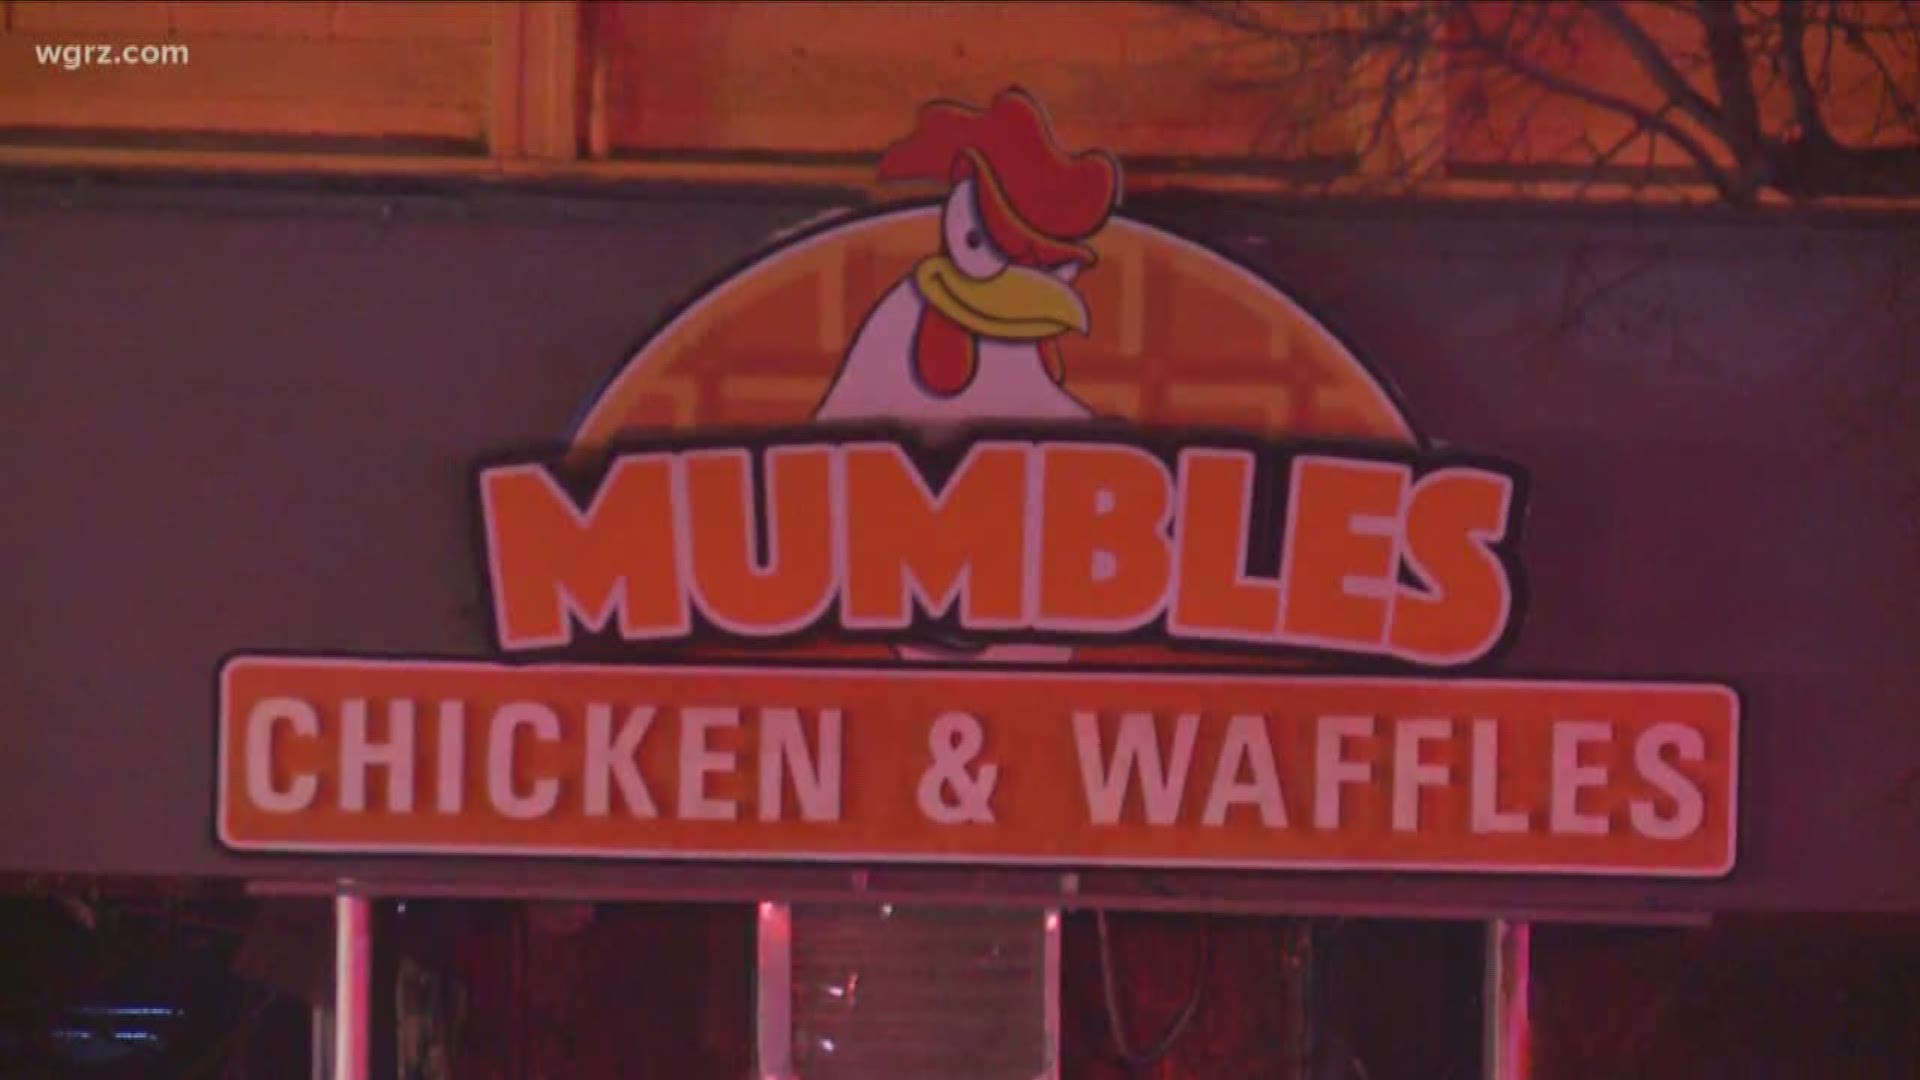 quarter million dollars in damage to "Mumbles Chicken and Waffles"... which is on Main street near U-B South.